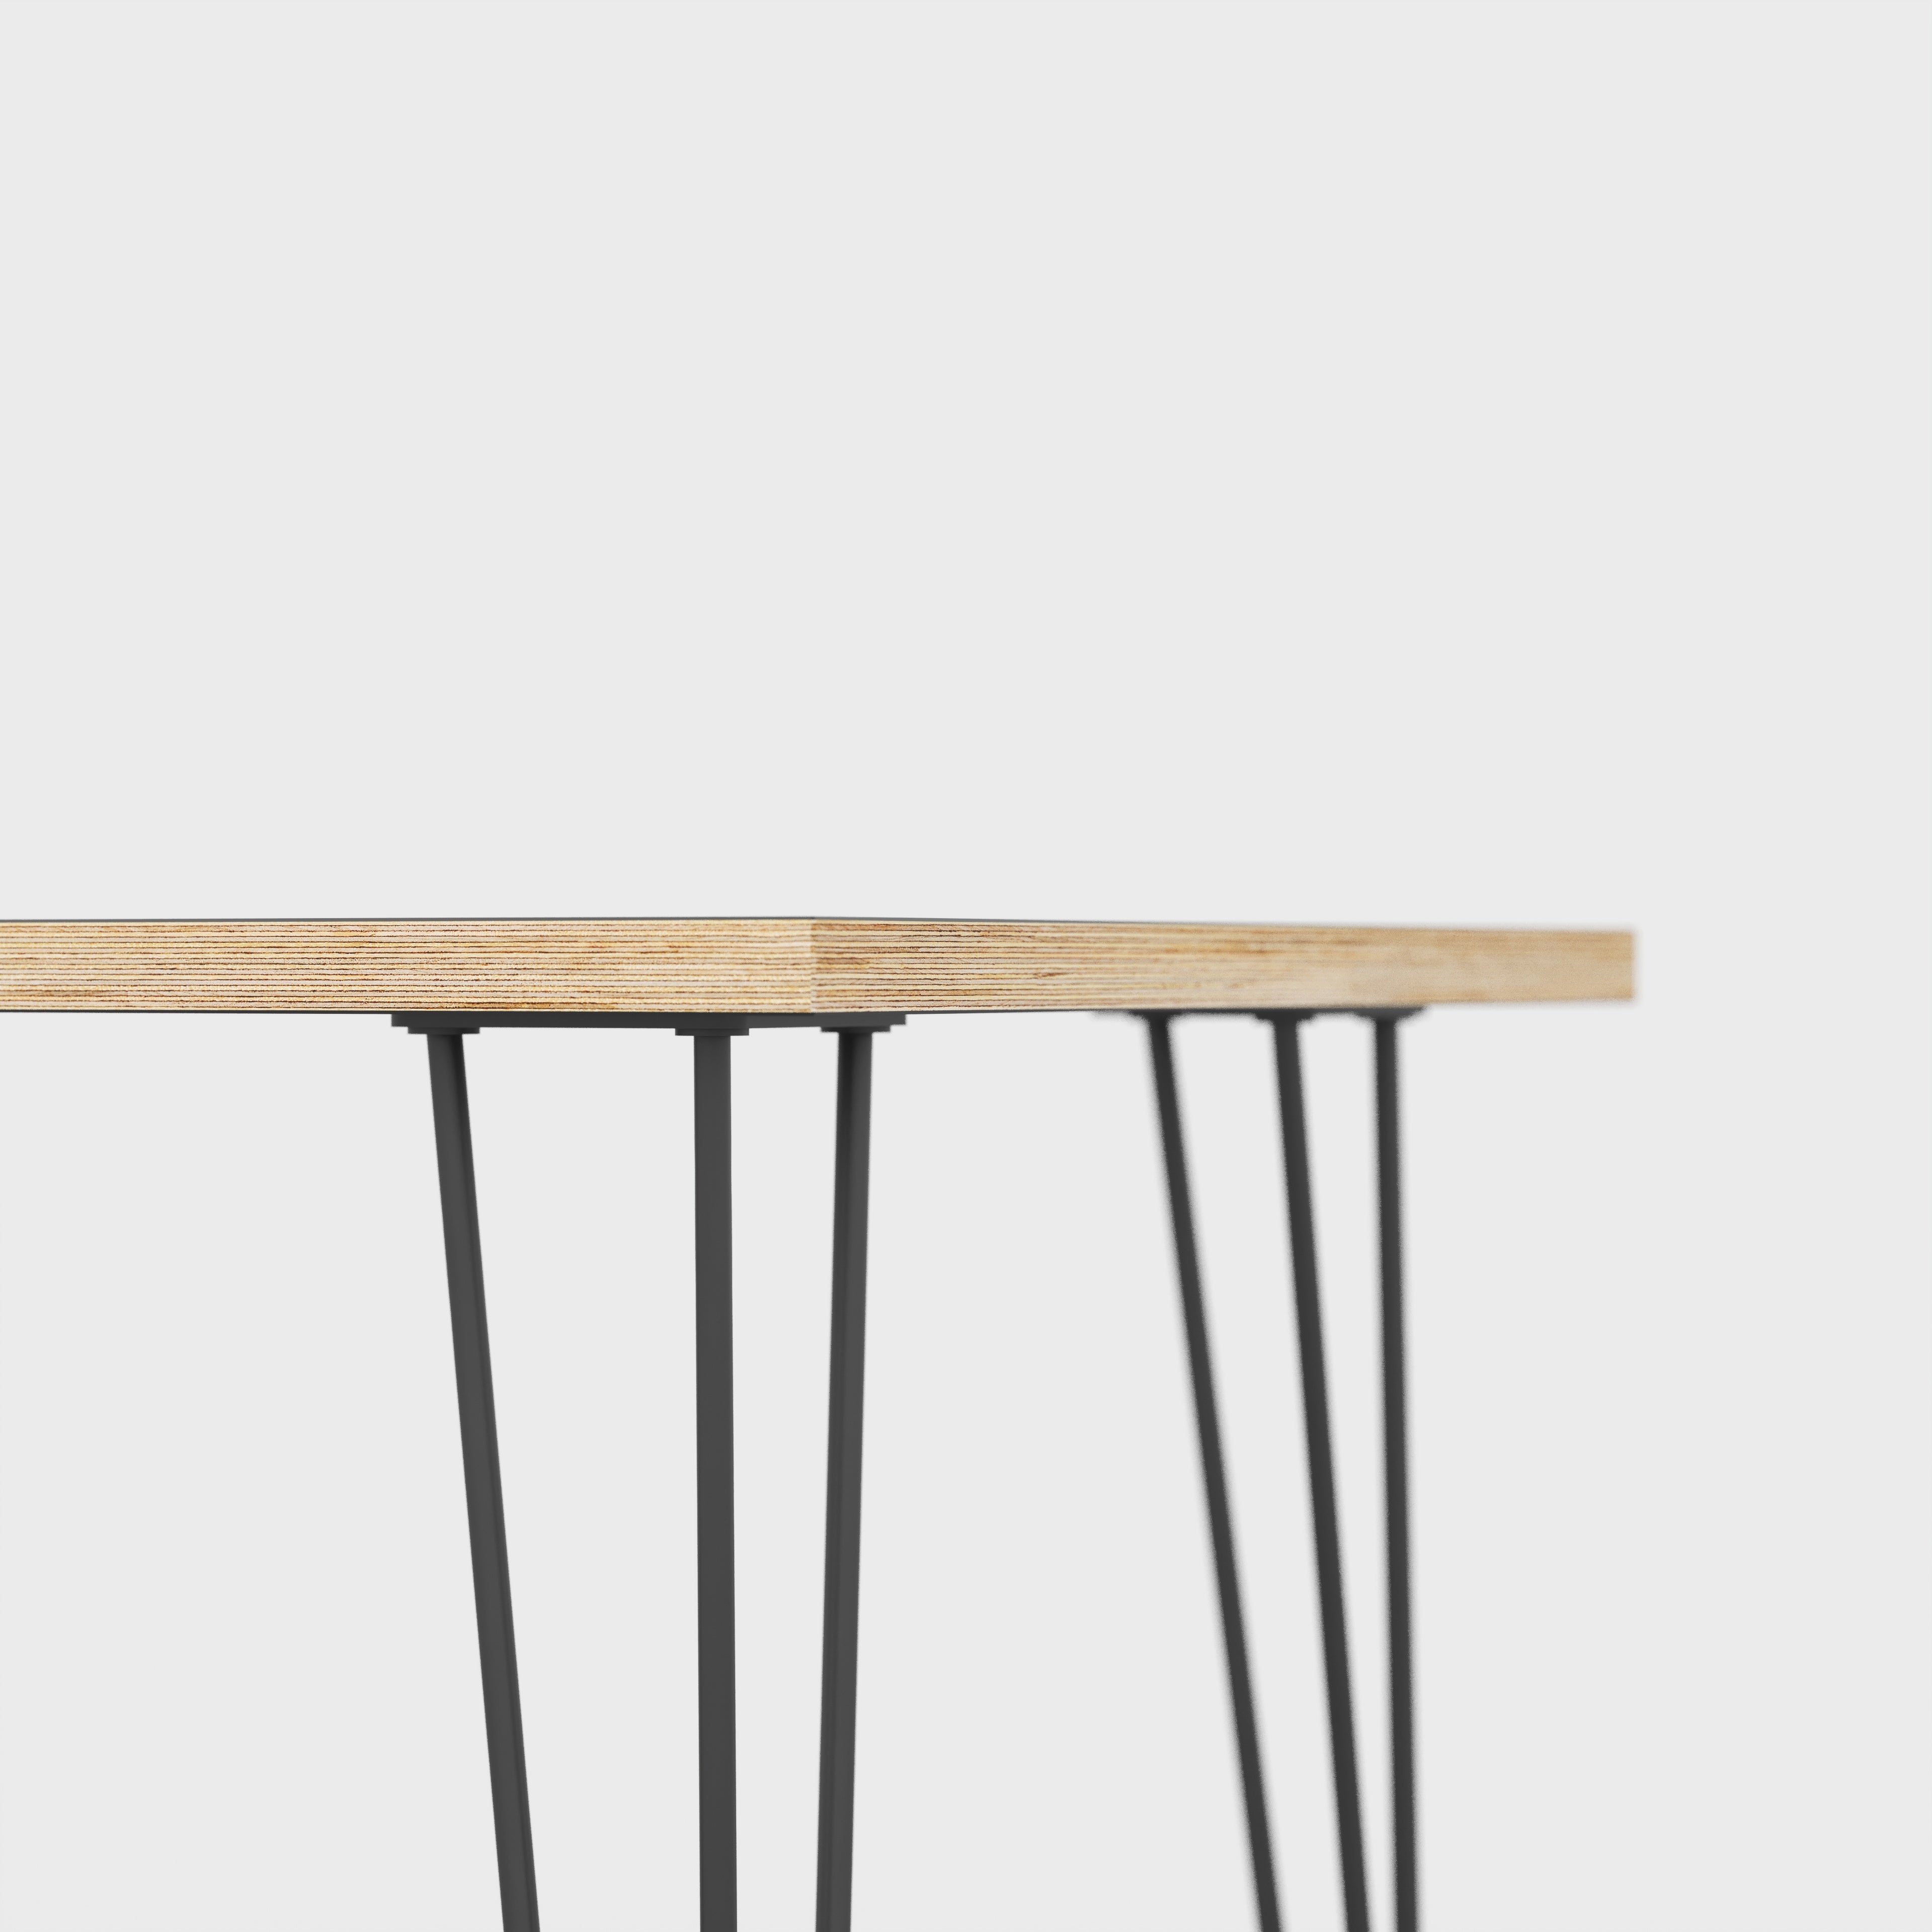 Table with Black Hairpin Legs - Formica Levante Orange - 1600(w) x 800(d)